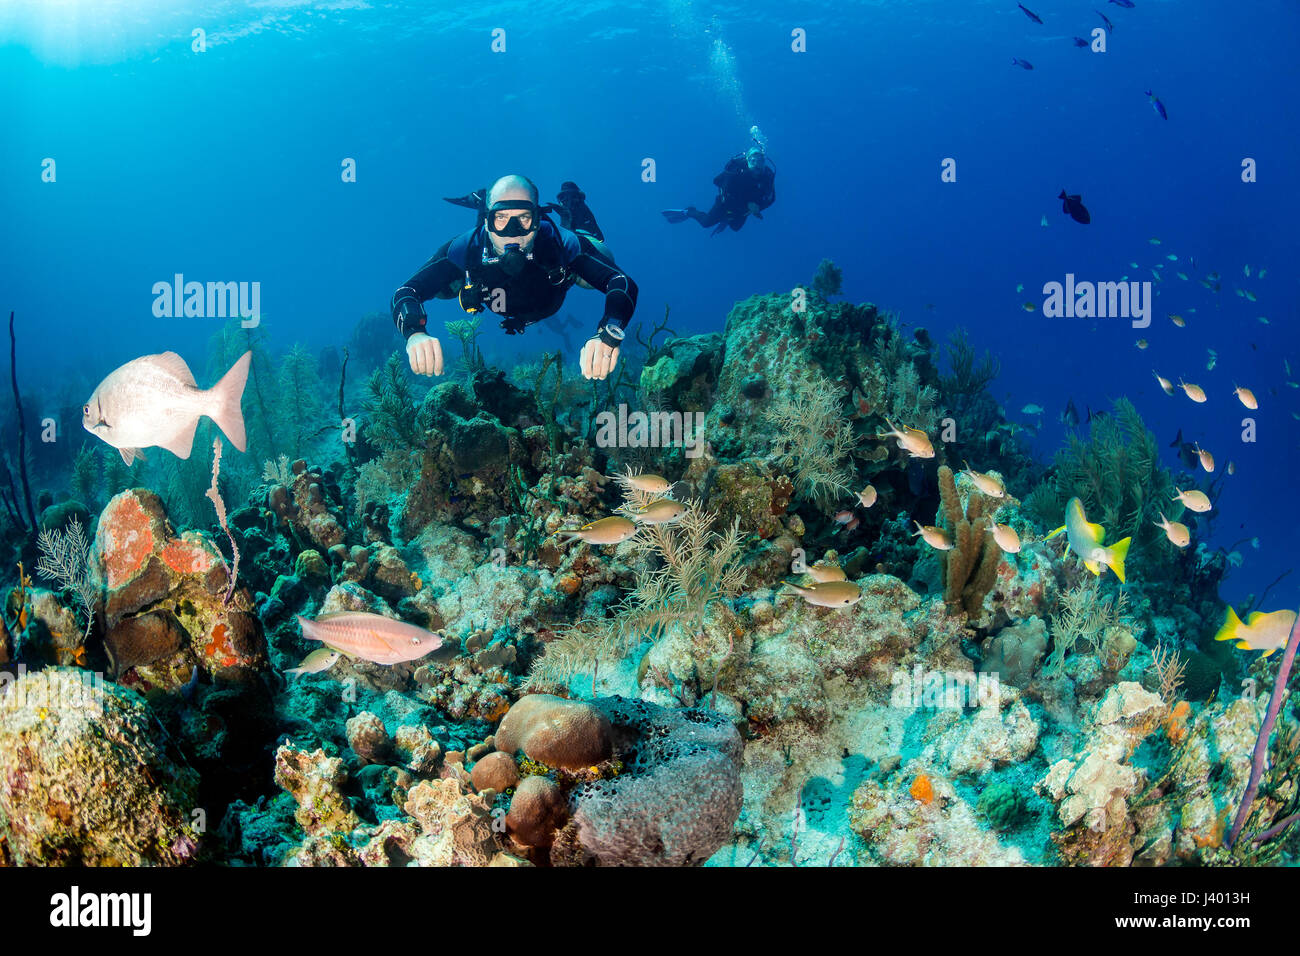 SCUBA diver in a technical sidemount cofiguration on a tropical coral reef Stock Photo